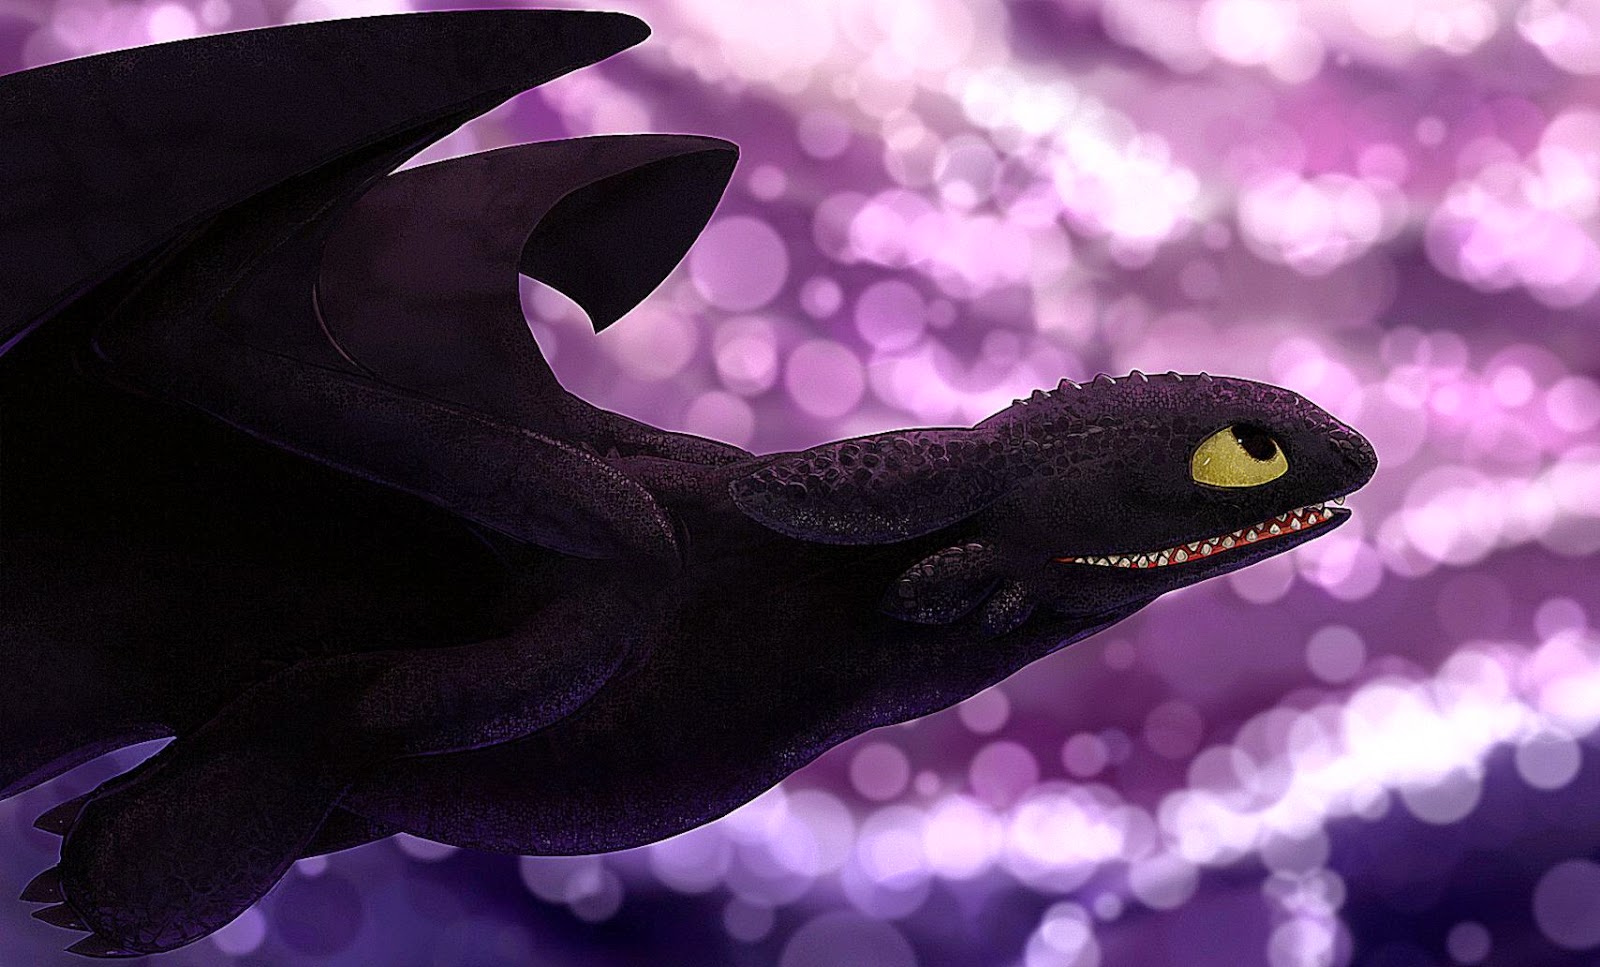 Toothless The Dragon Wallpaper Cool HD